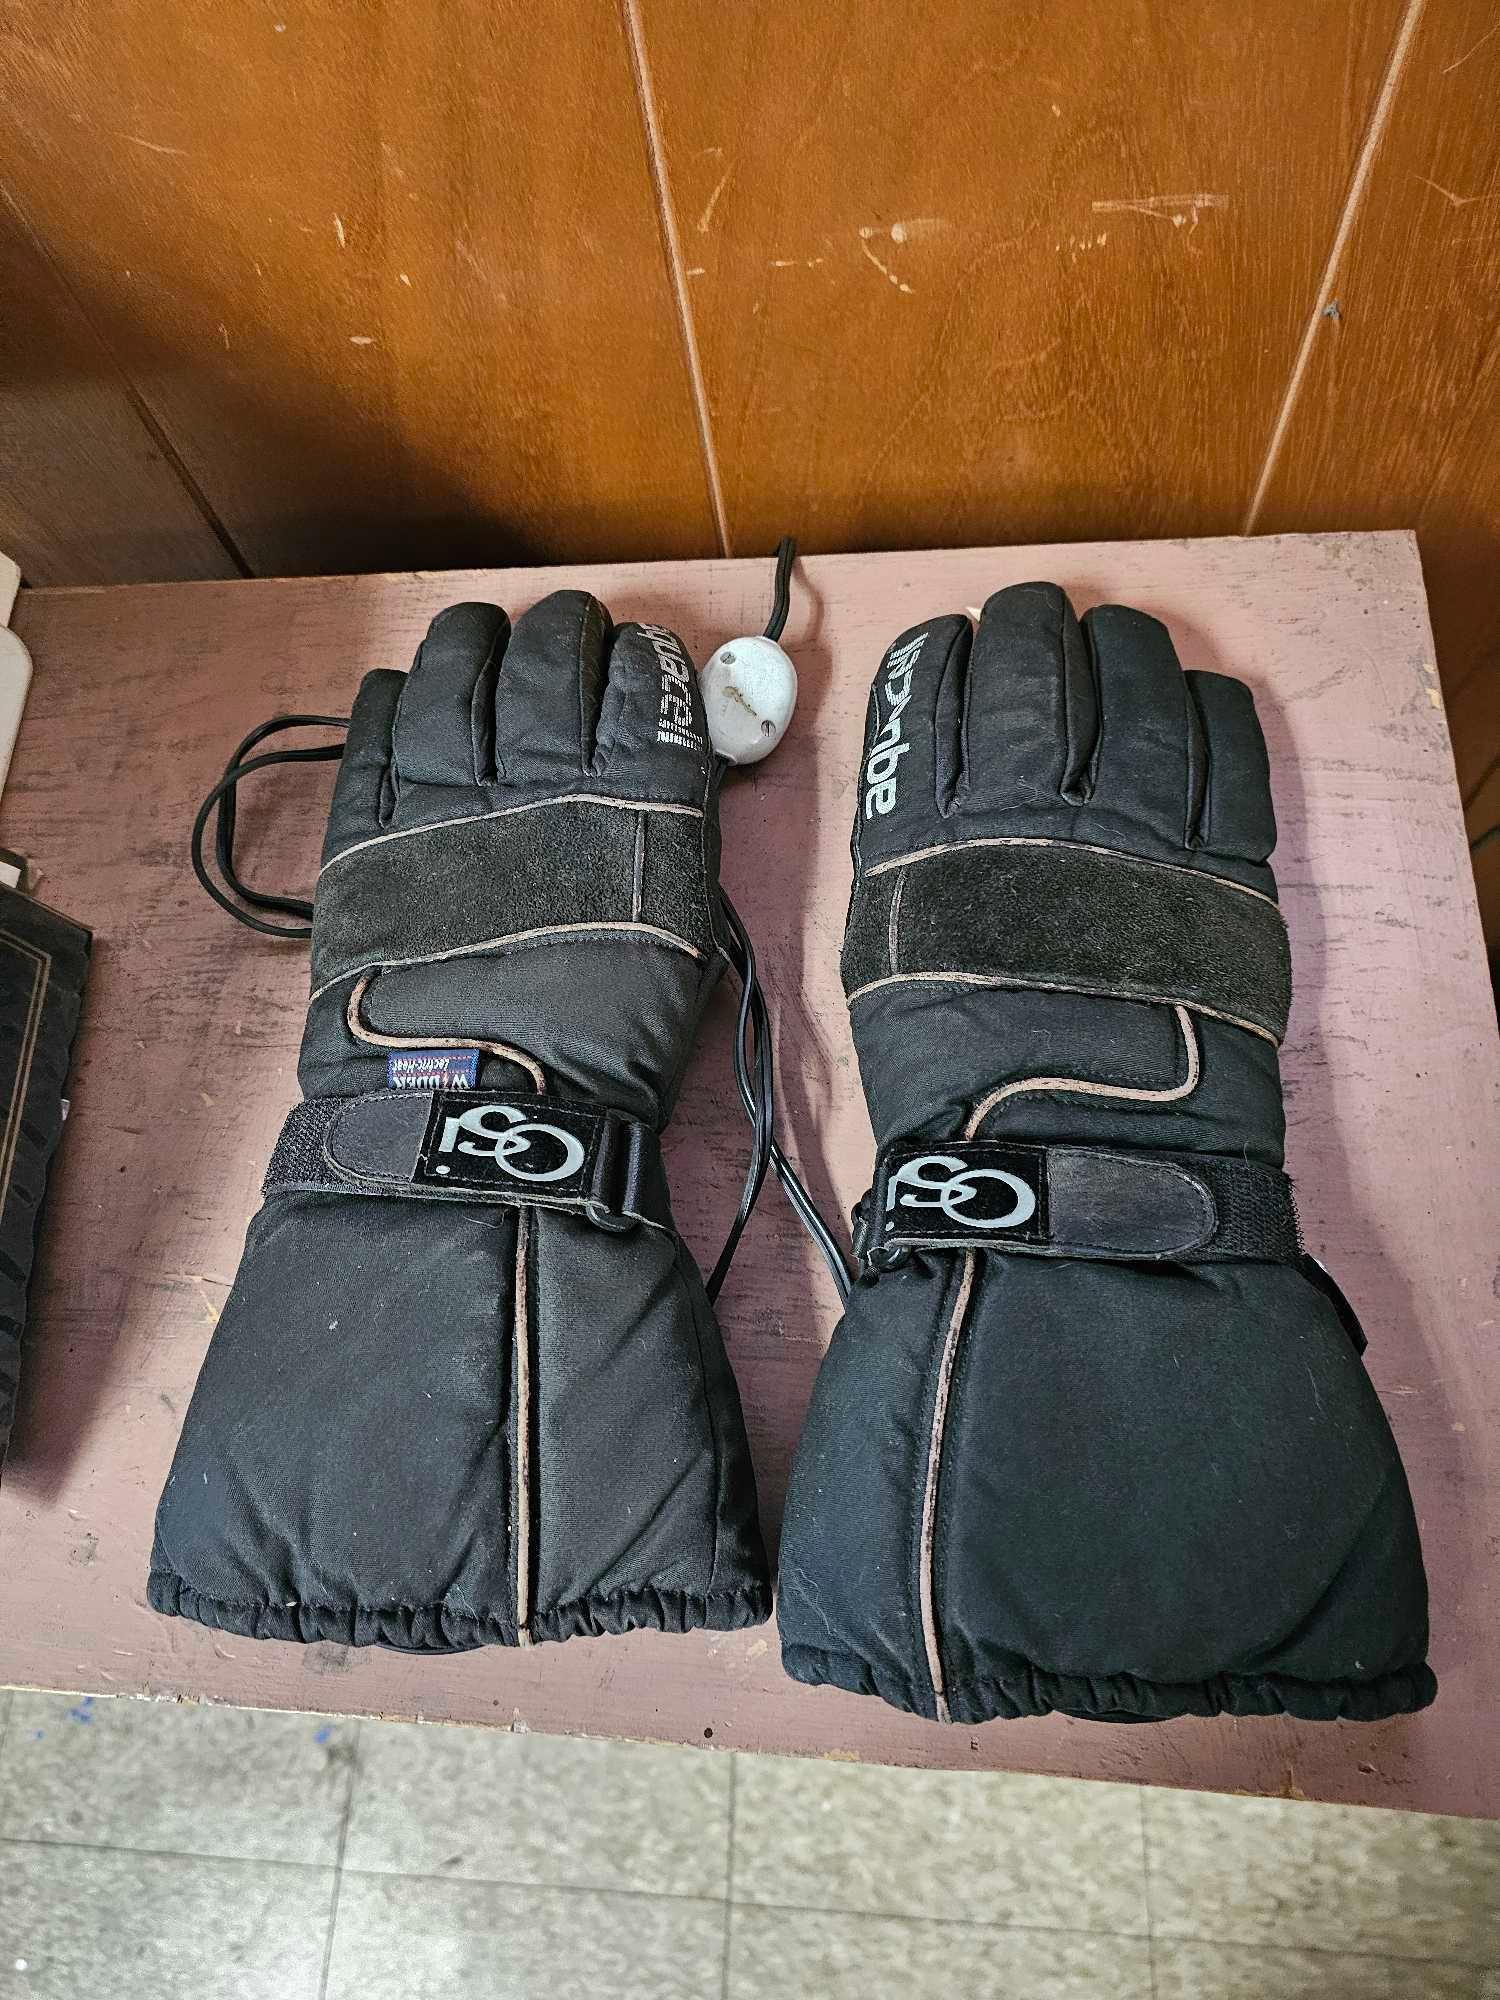 MOTORCYCLLE BOOTS-GLOVES AND RAIN GEAR